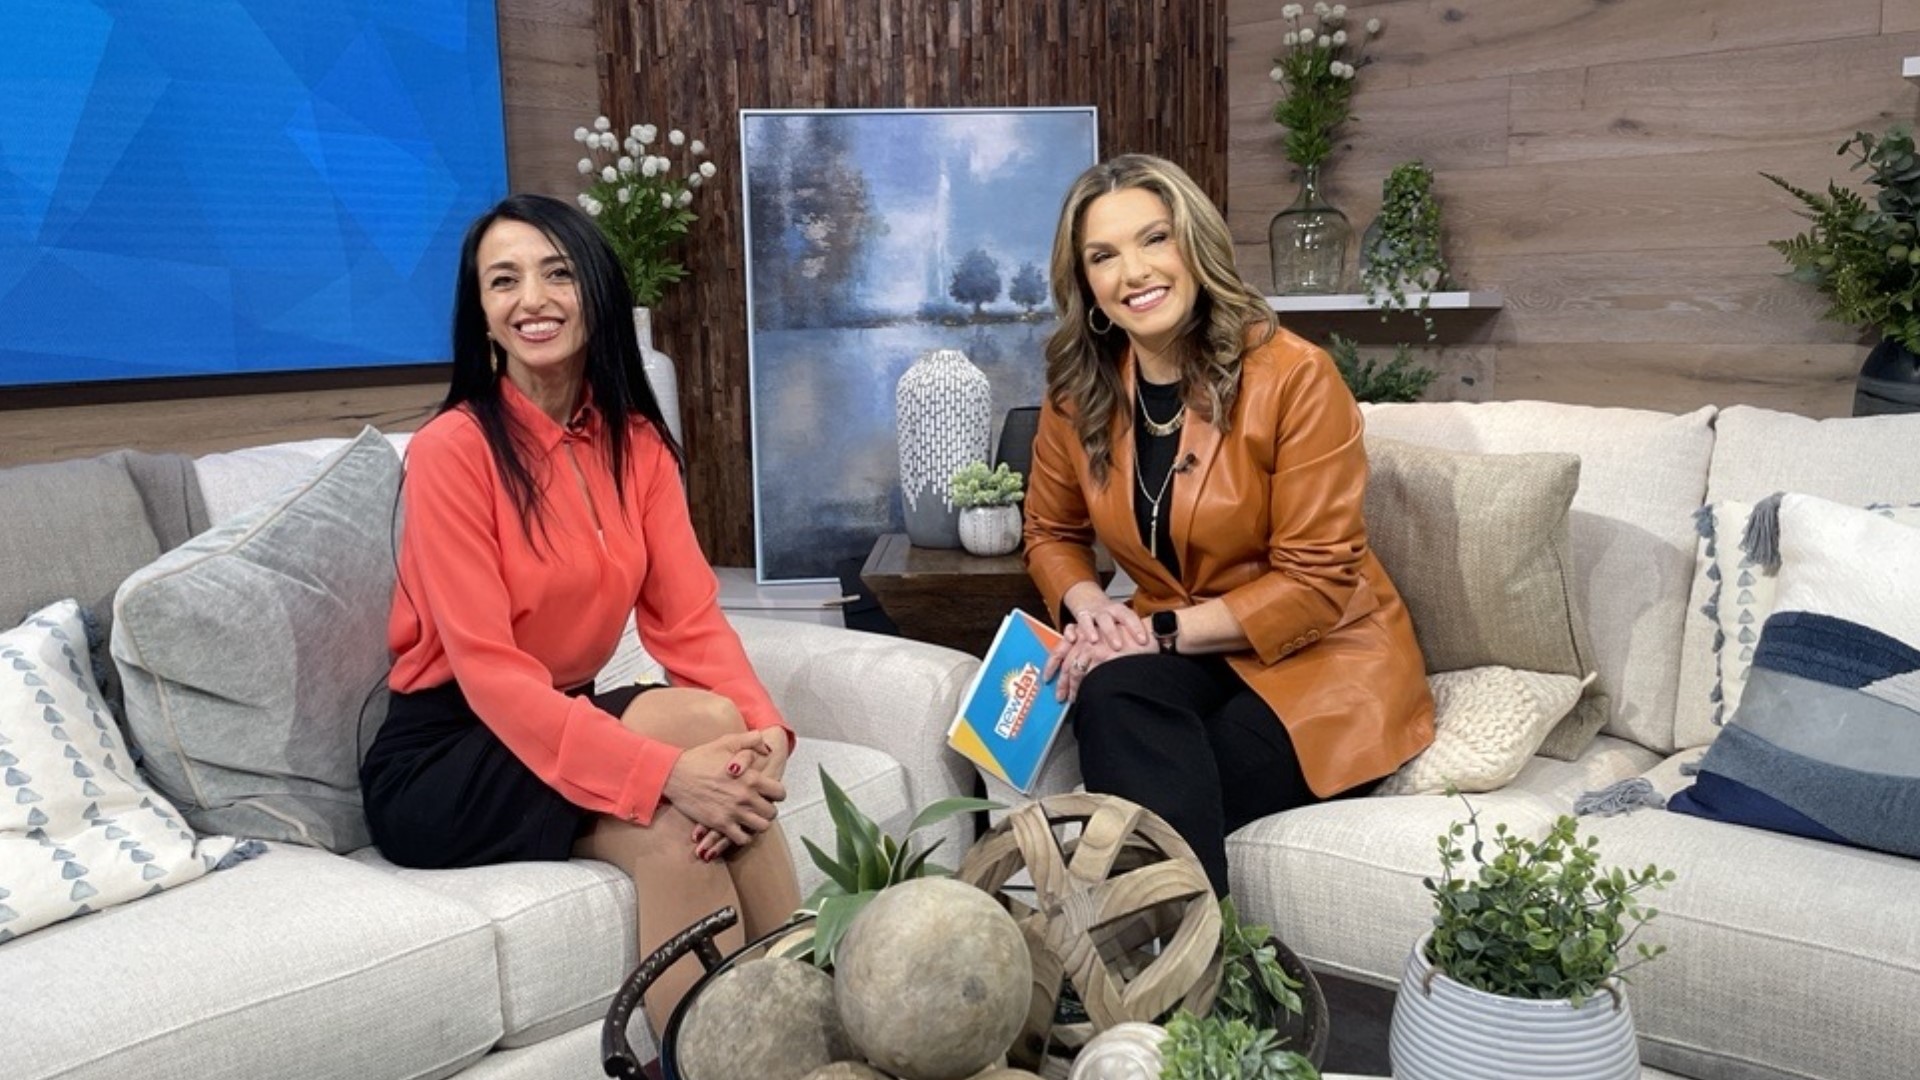 Dr. Madalina Petrescu, a cardiologist from EvergreenHealth, shares simple and holistic ways to keep our hearts healthy. Sponsored by EvergreenHealth.